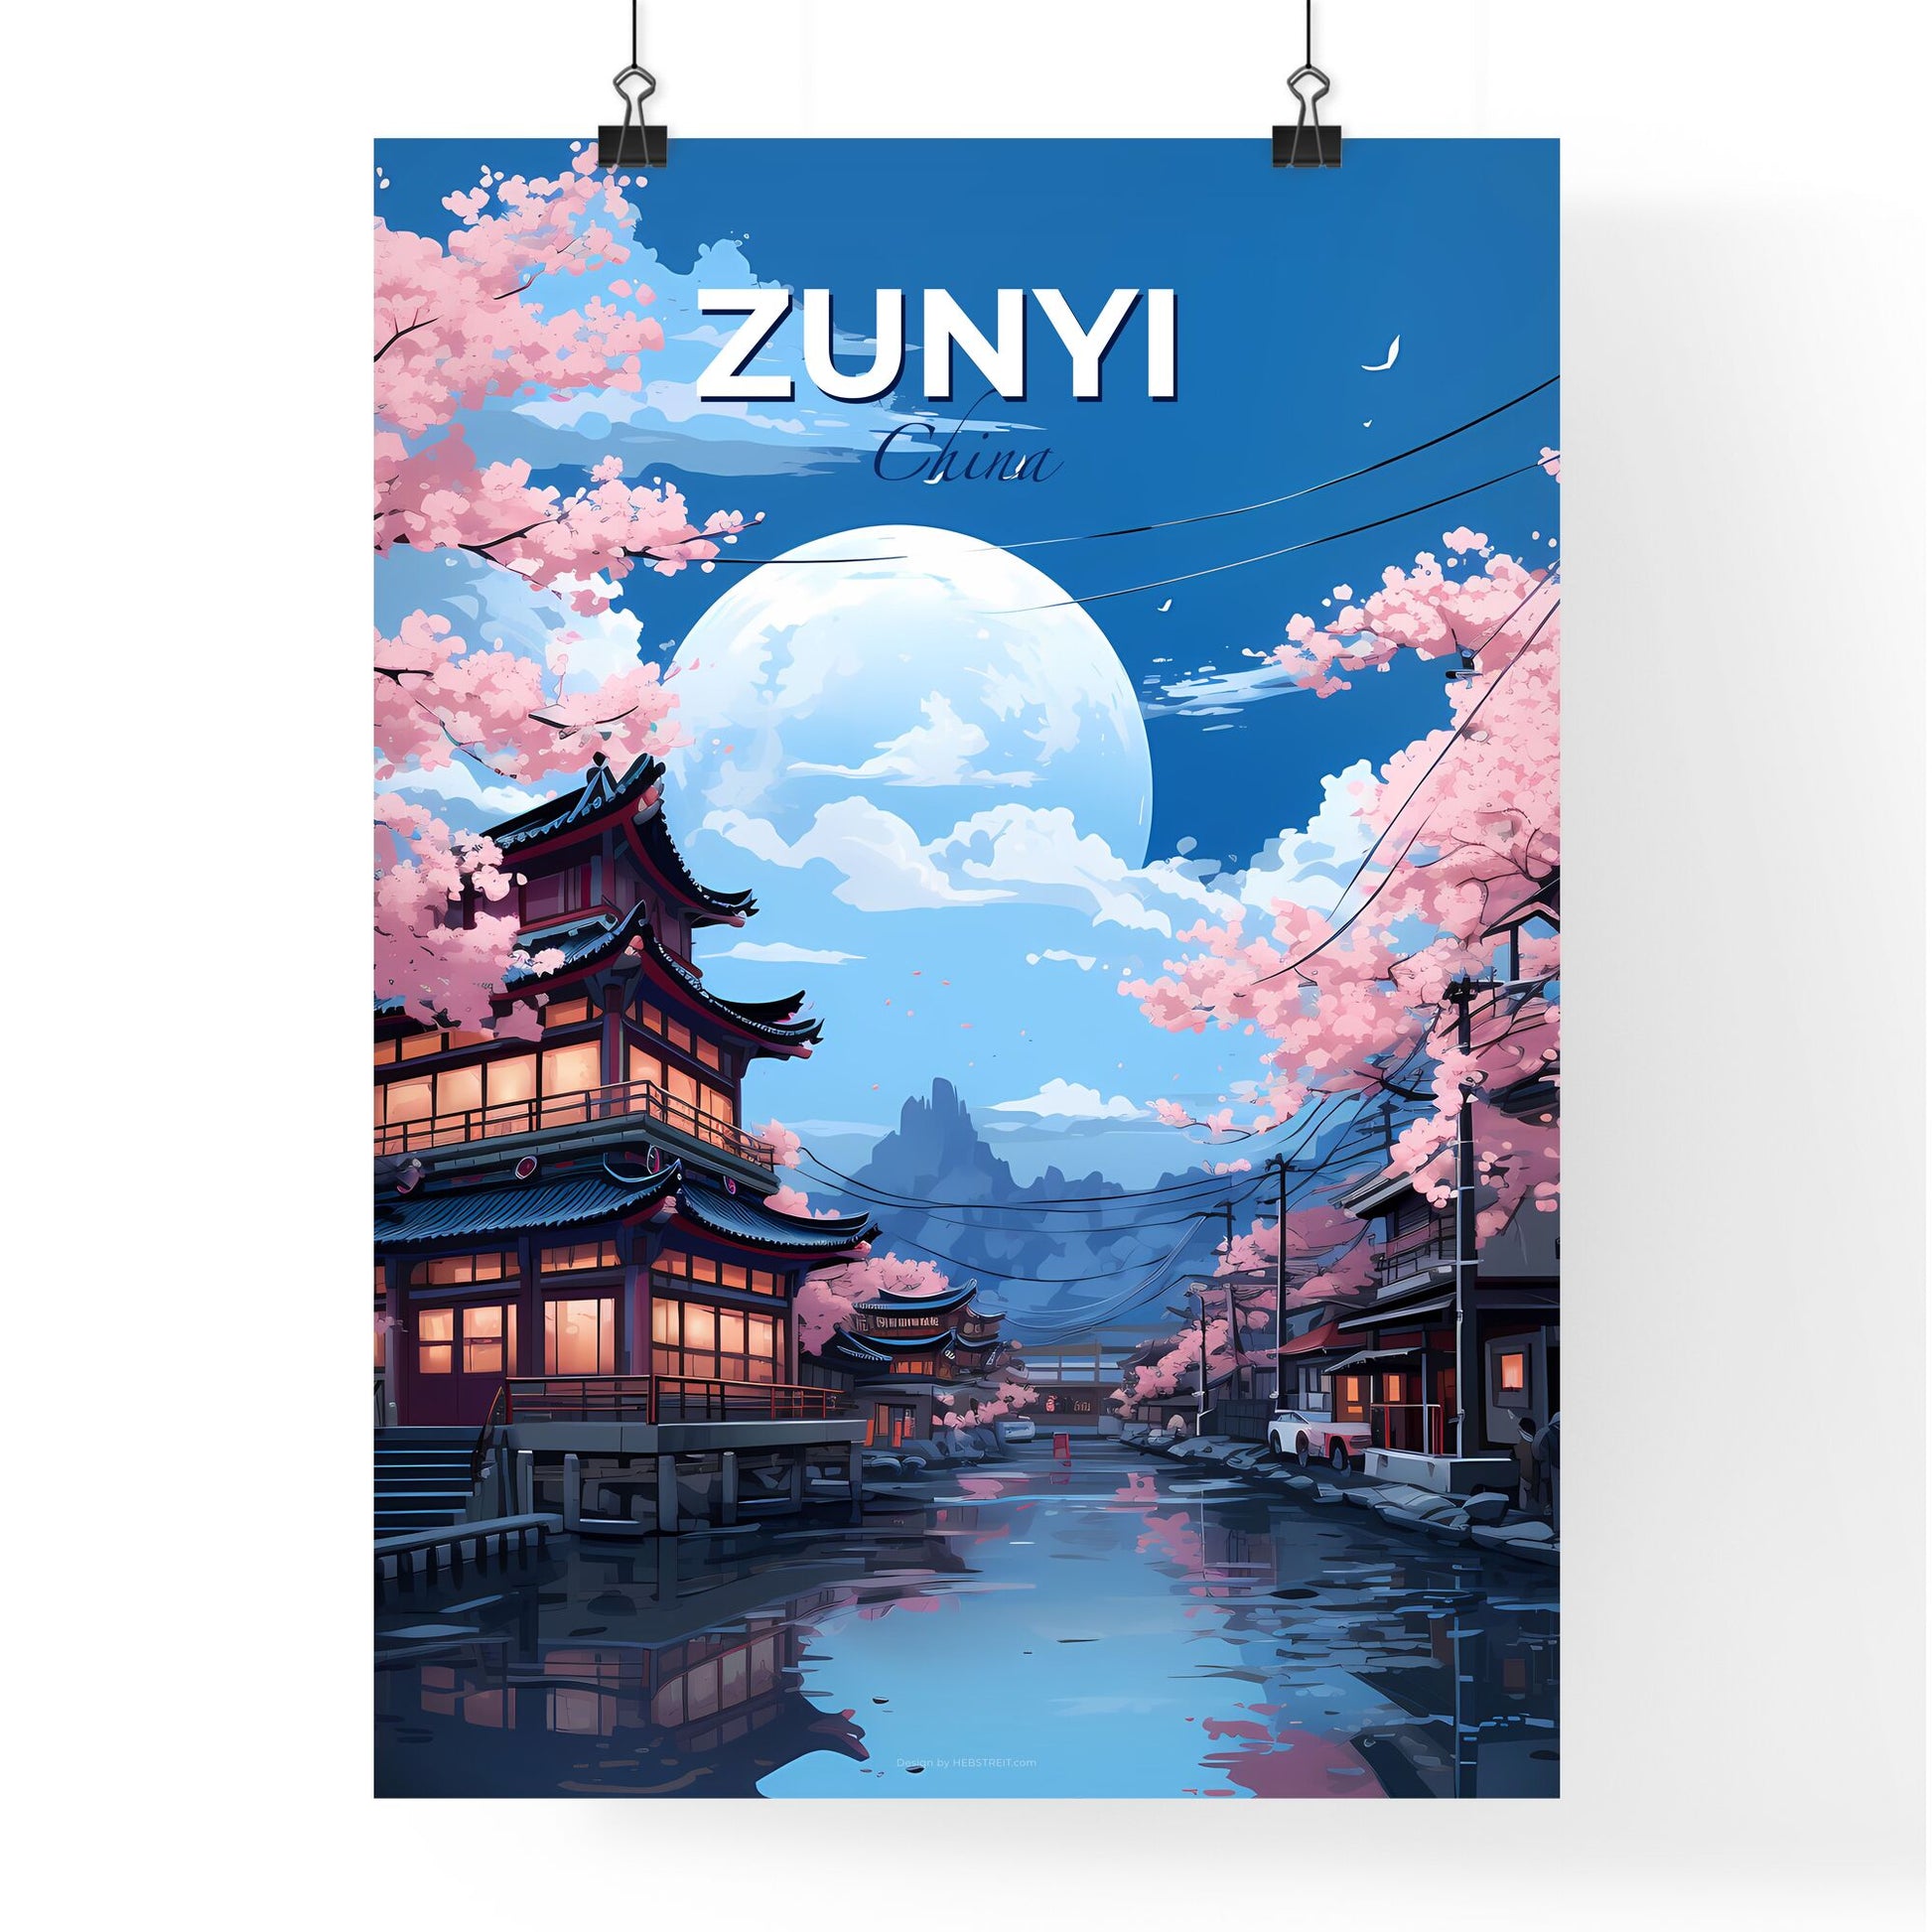 Zunyi China Skyline Panorama with River, Pink Flowers, Buildings and Full Moon Default Title